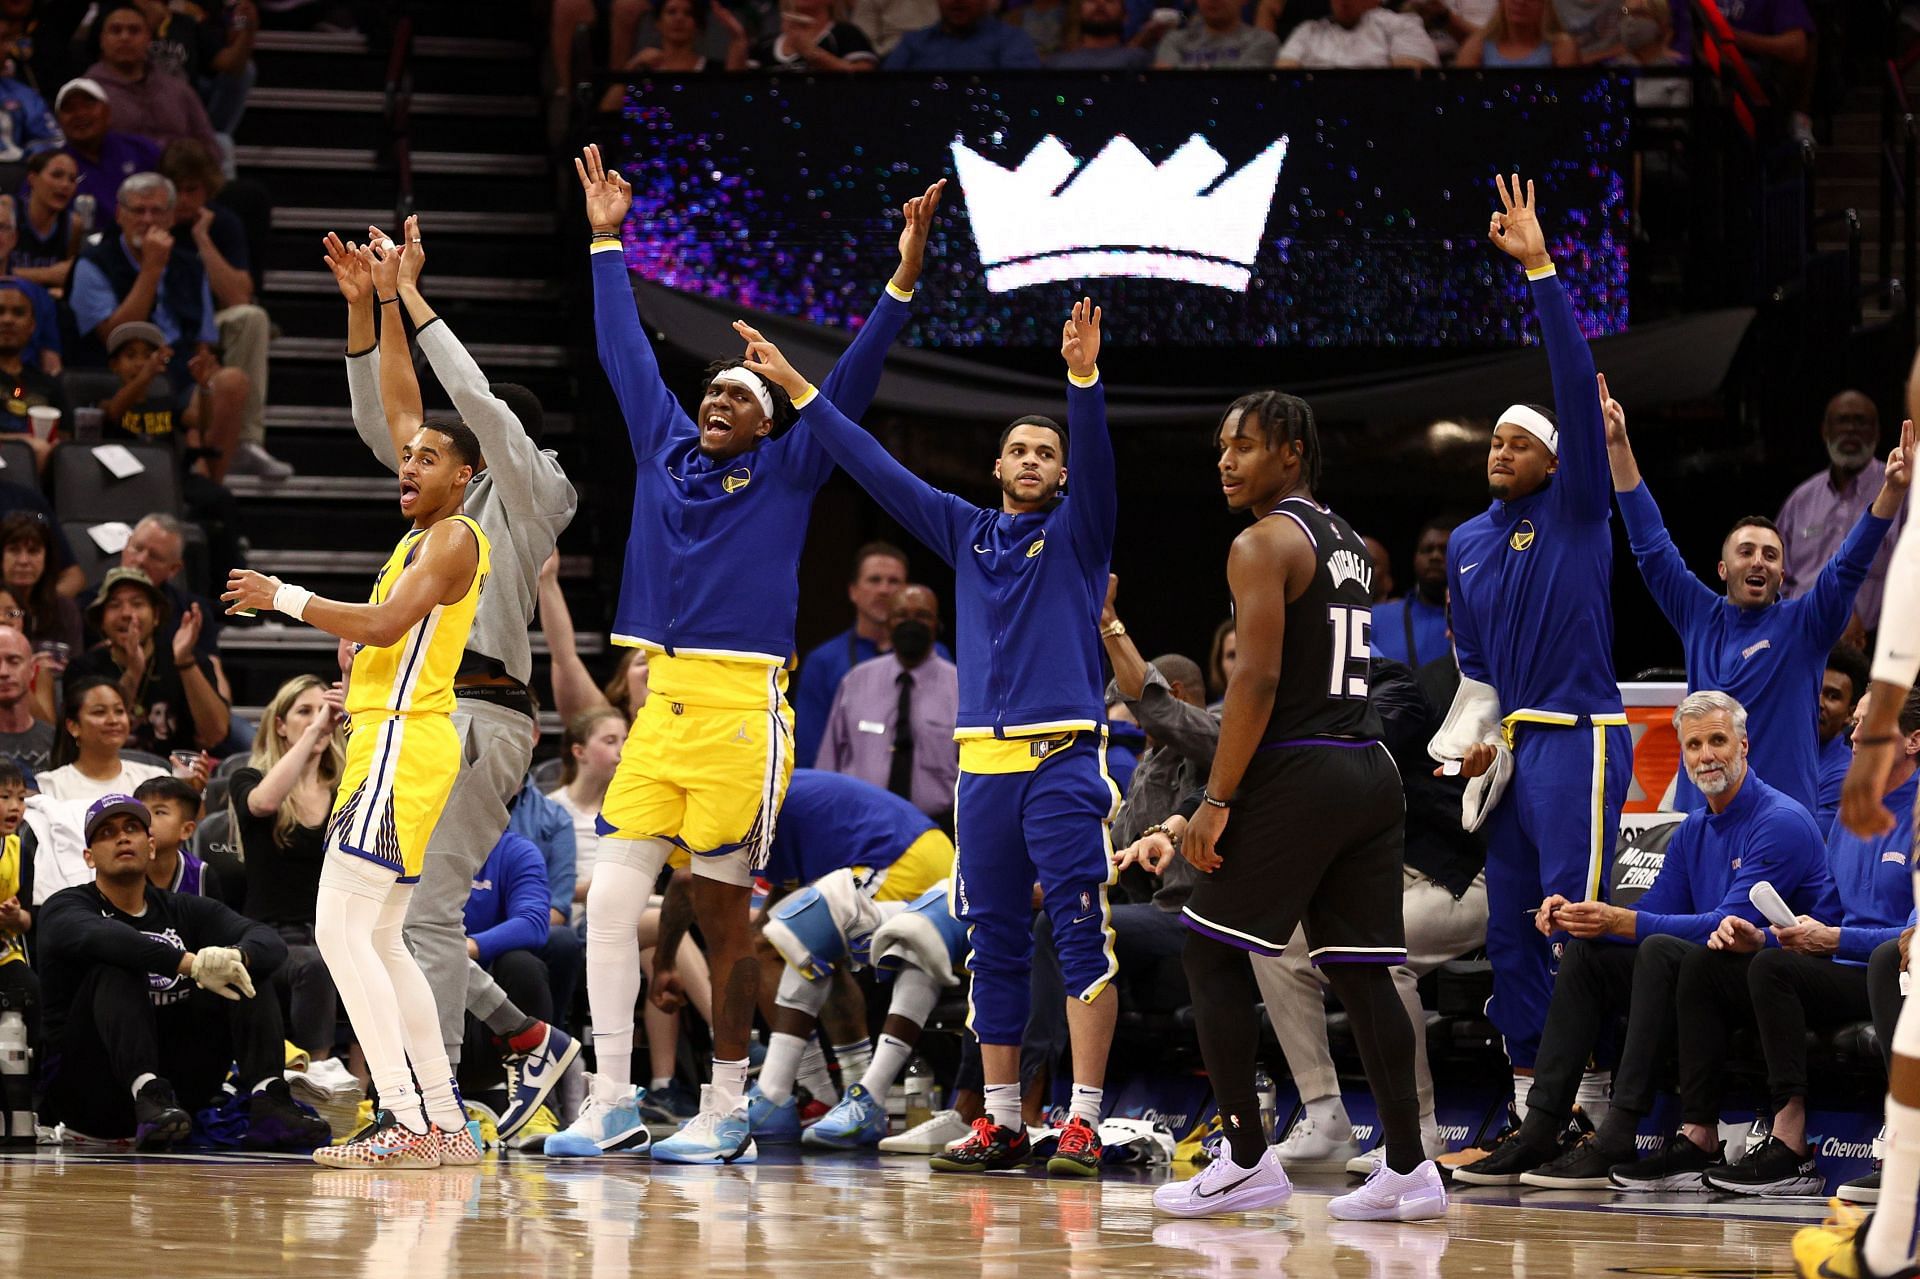 The Golden State Warriors came up with a win against the Sacramento Kings